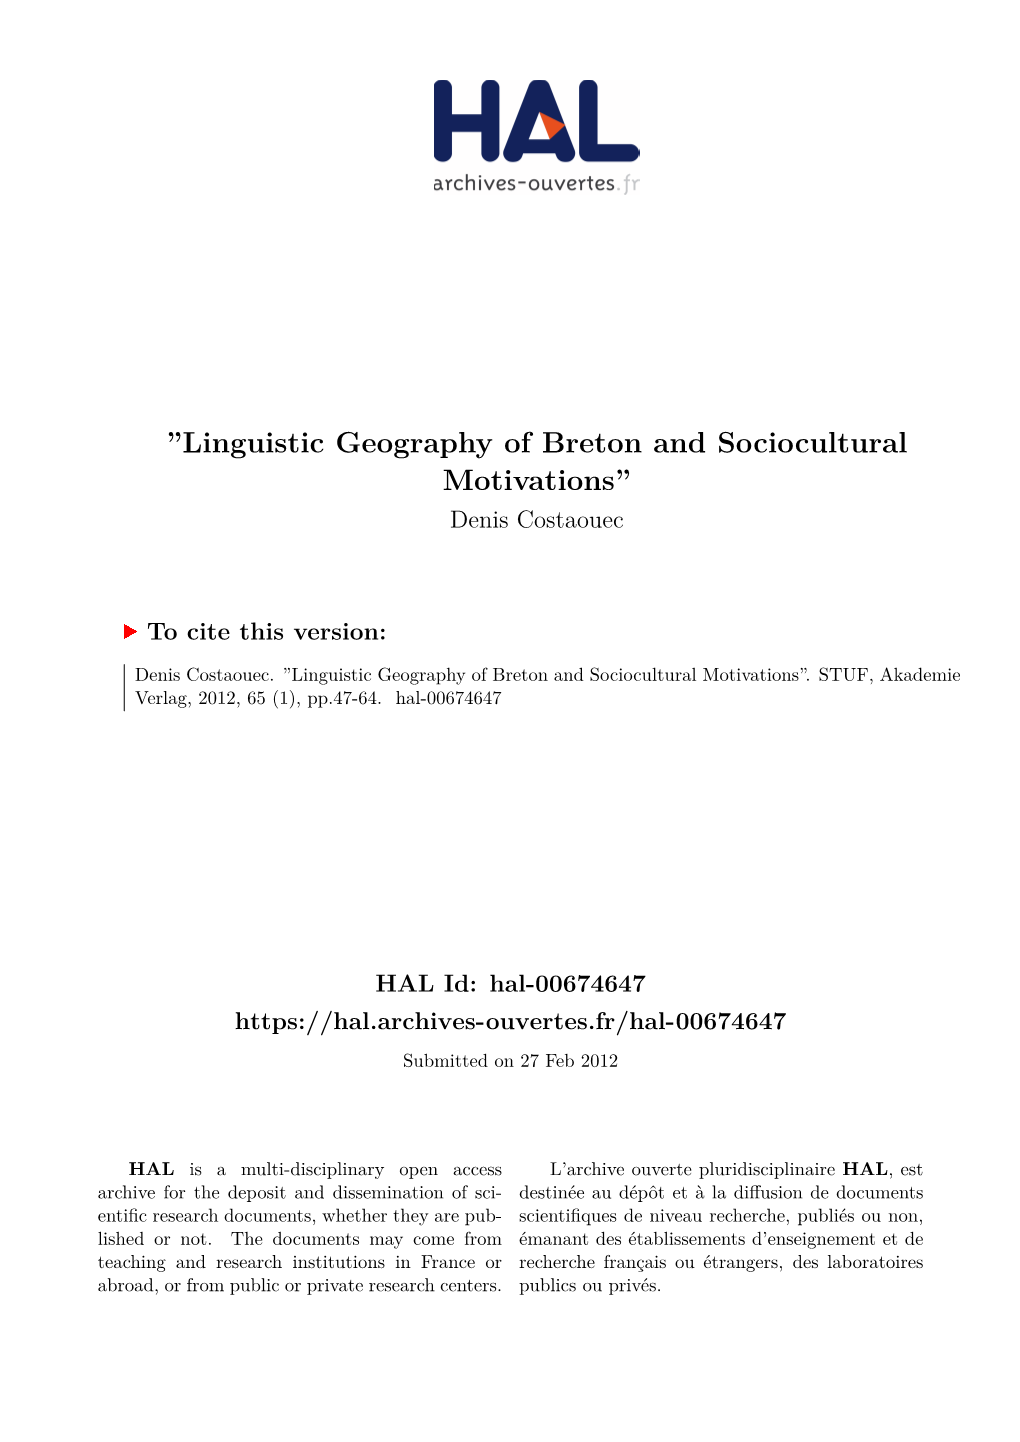 ''Linguistic Geography of Breton and Sociocultural Motivations''